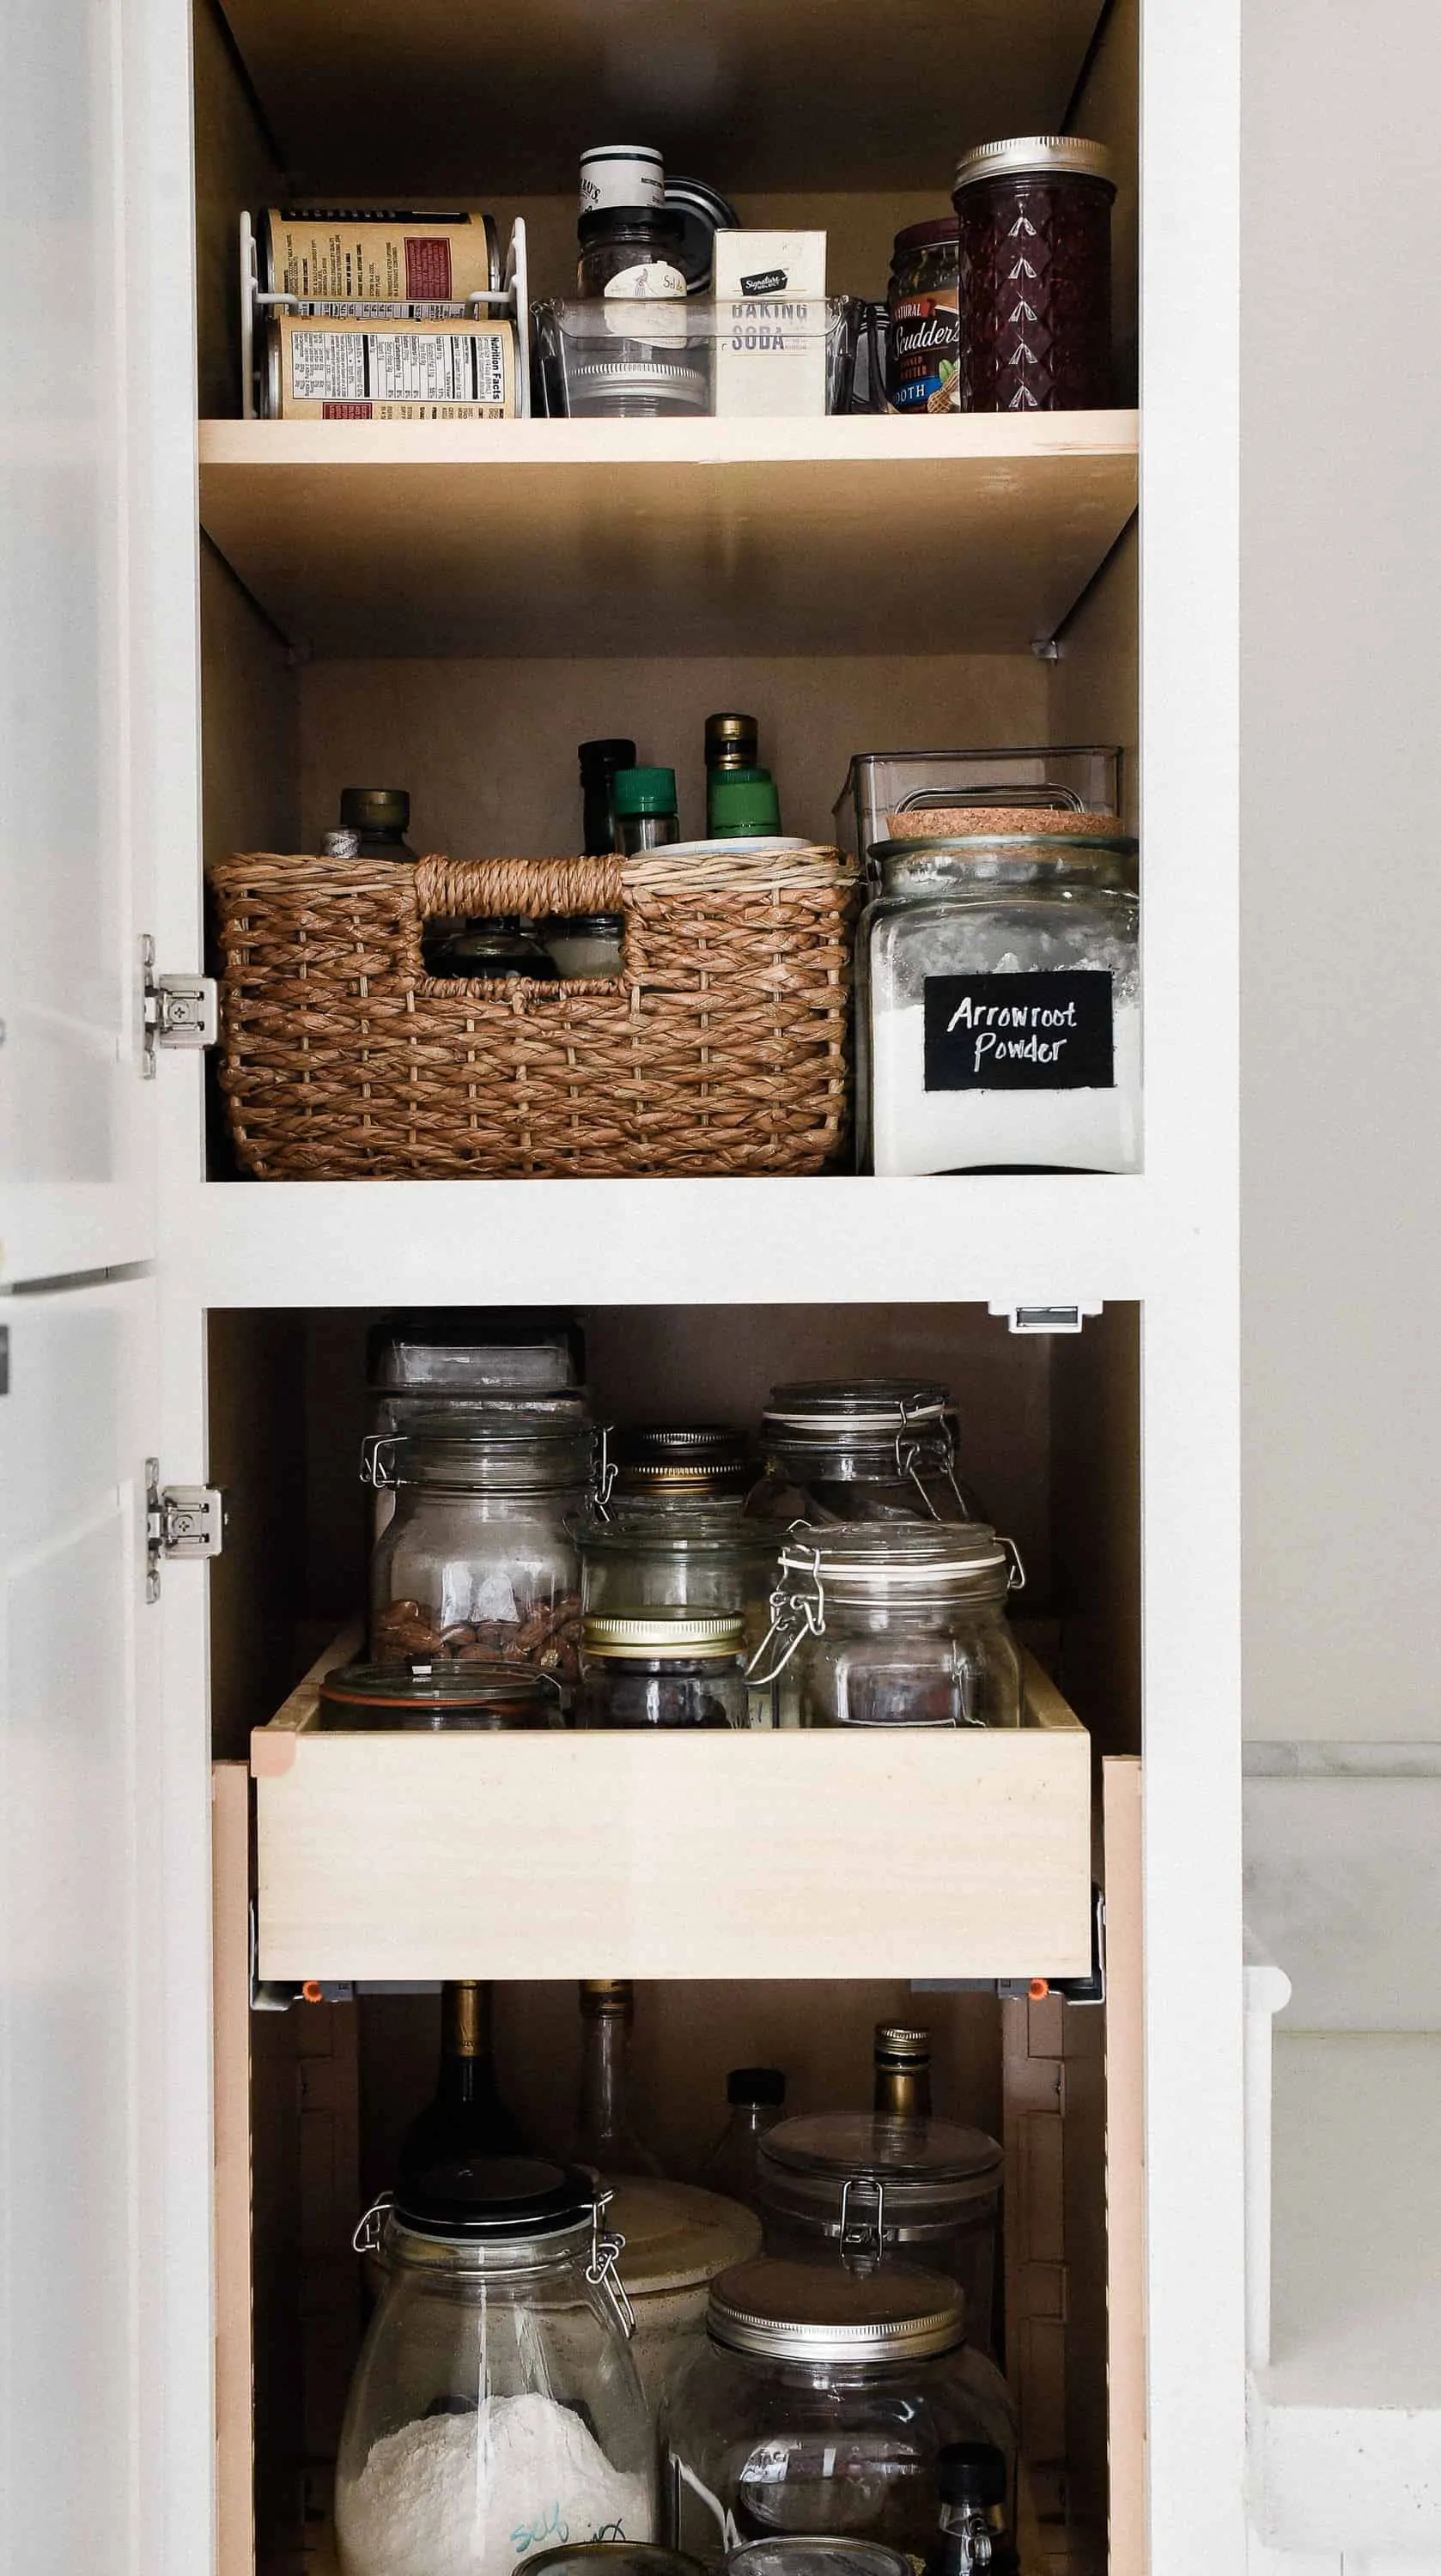 Looking for easy ways to organize your kitchen and home? Use my free printable kitchen cabinet clean-out checklist, and scroll down to get more organization ideas & printables!